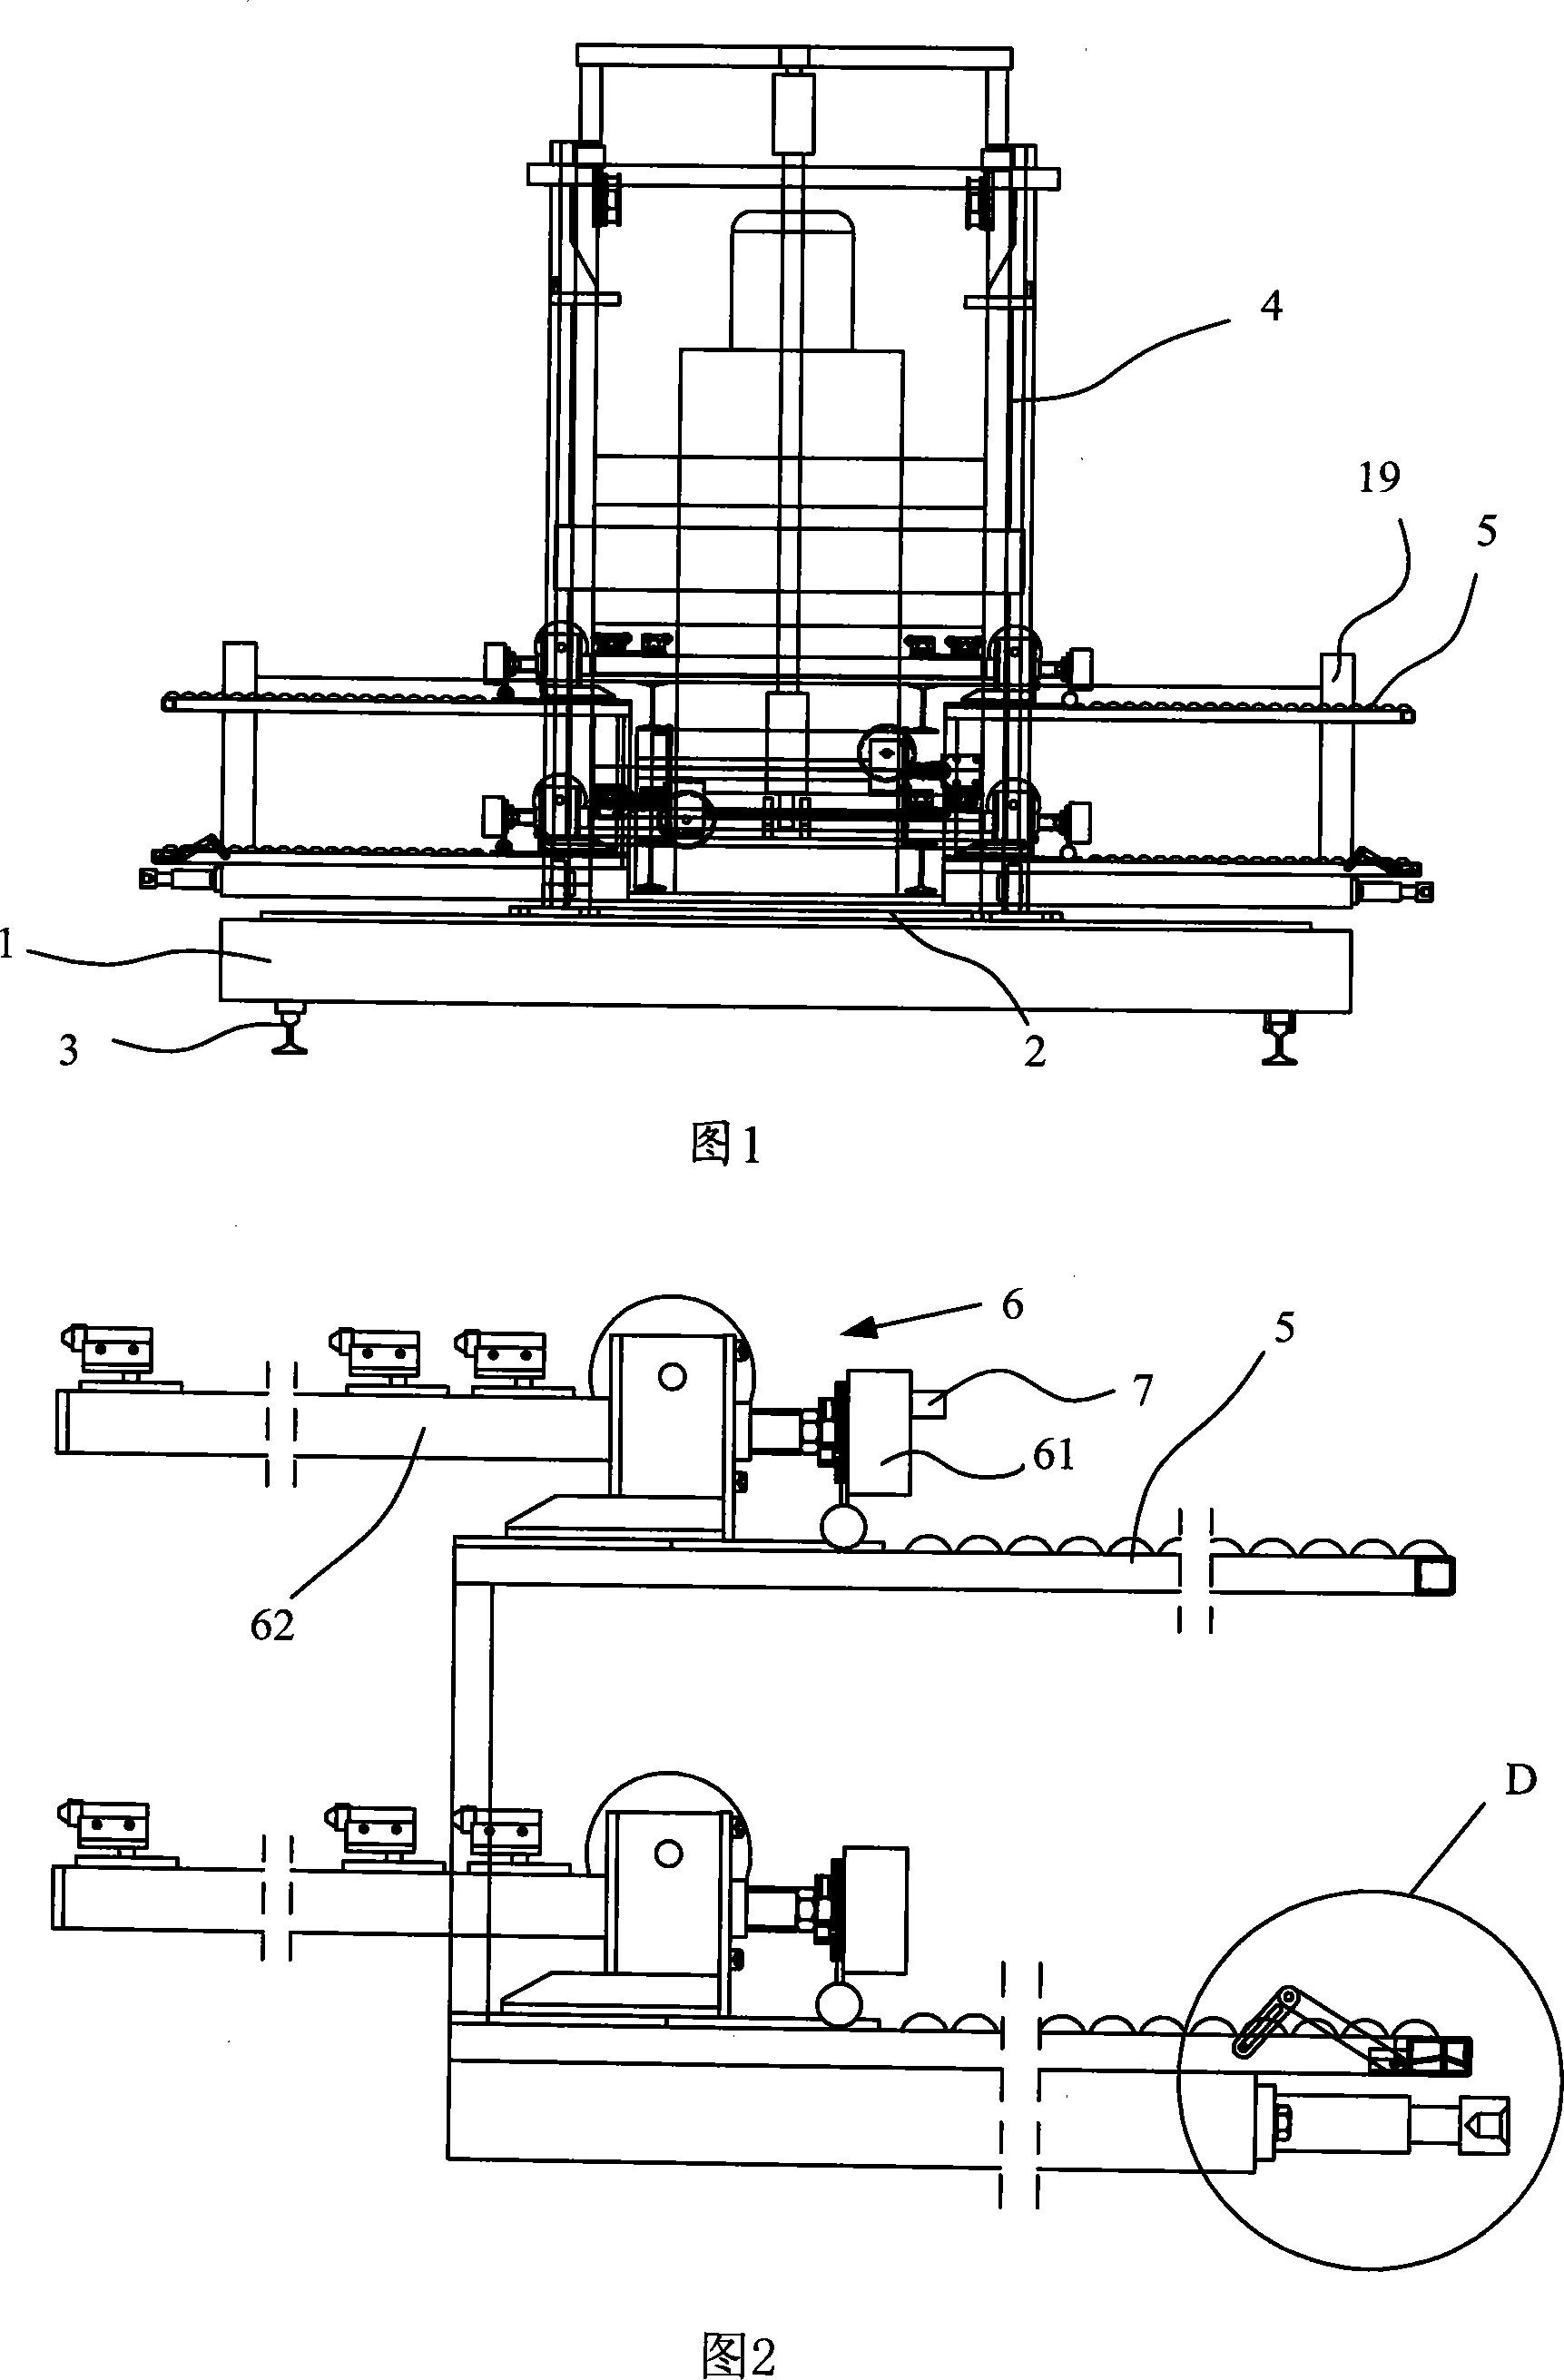 Vehicle mounted dynamic battery changing system